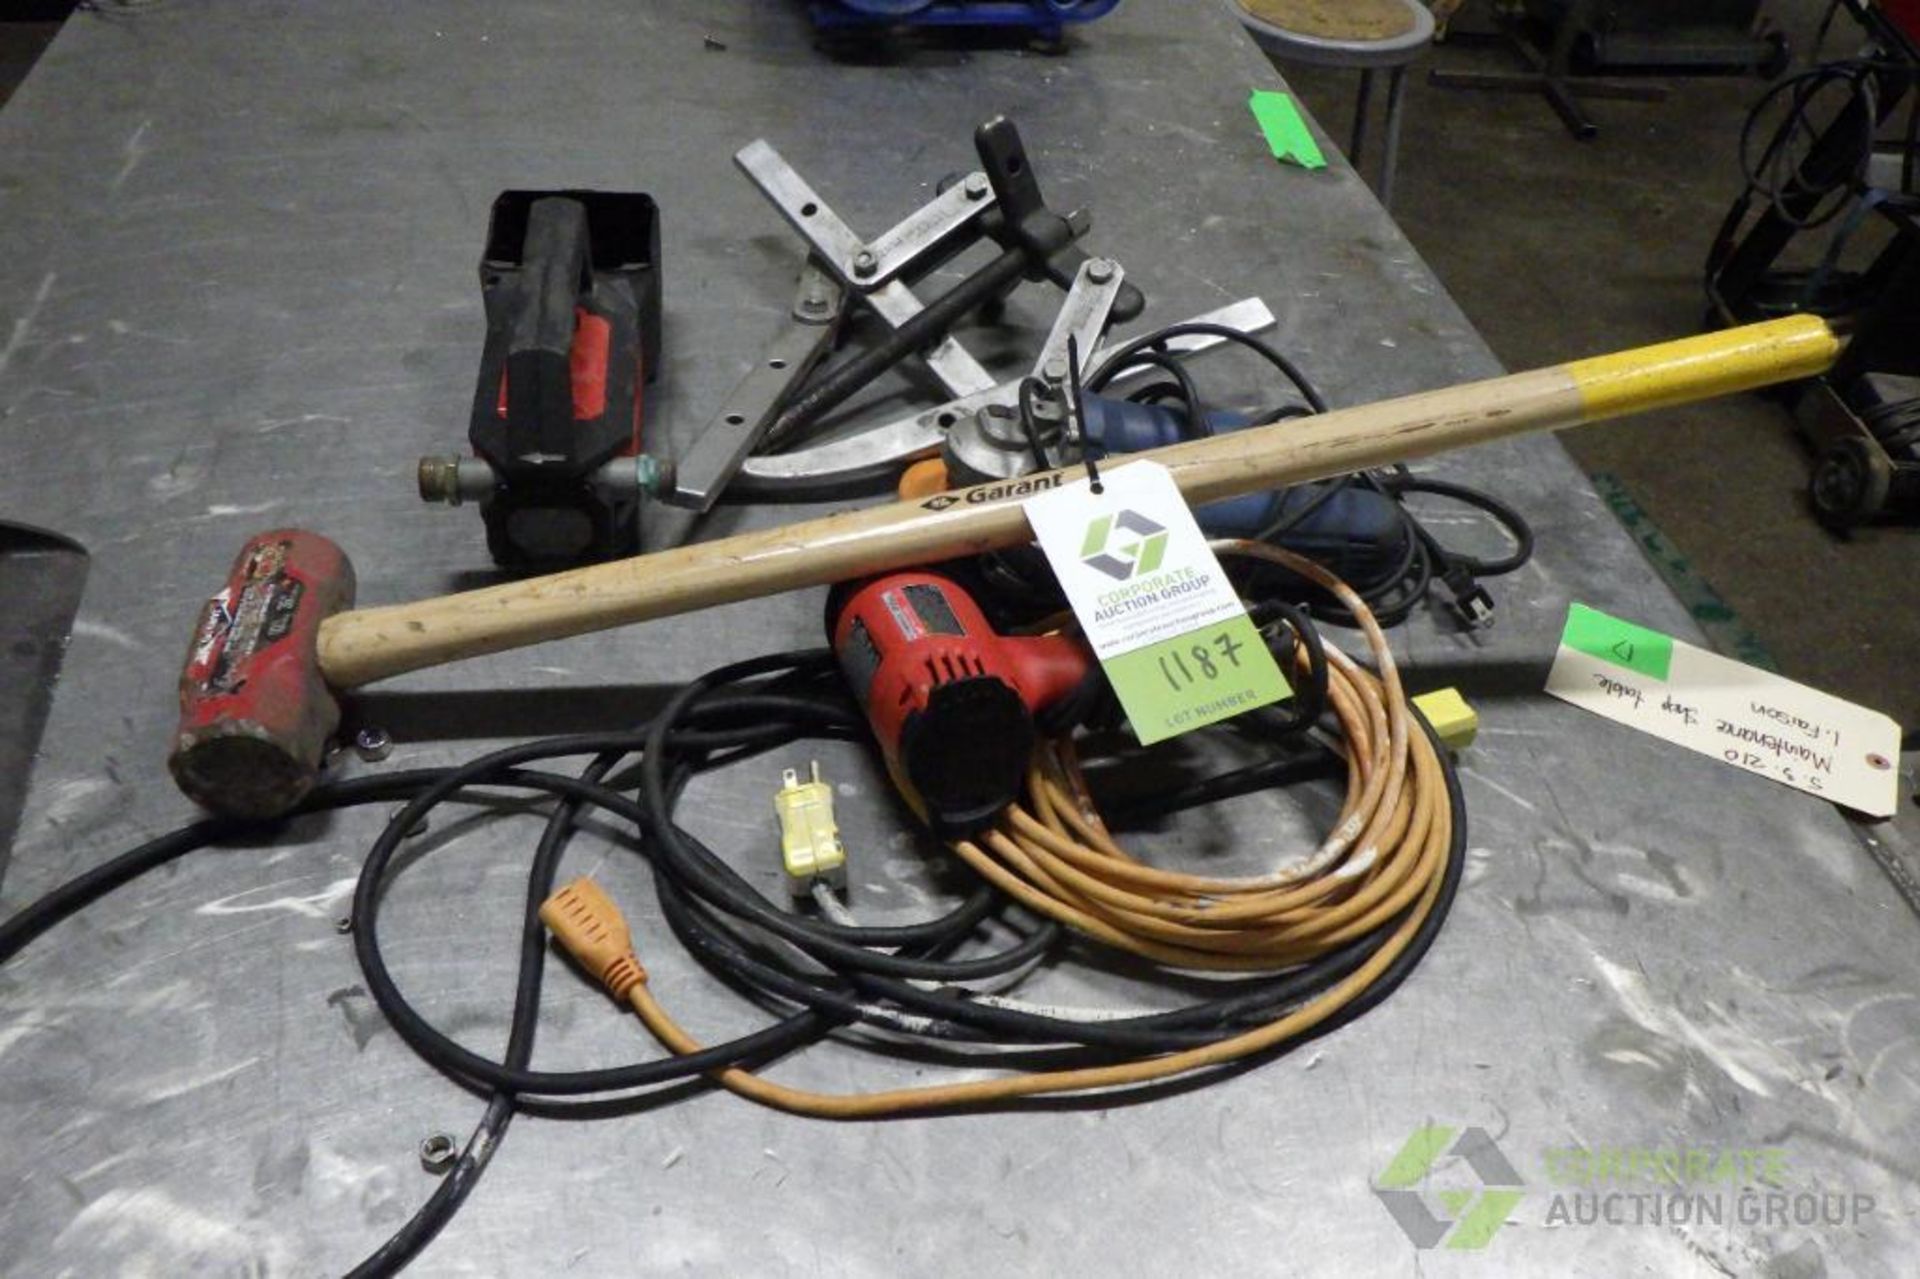 Assorted tools, including sledge hammer, heat gun, angle grinders, pulley puller, Milwaukee tr. pump